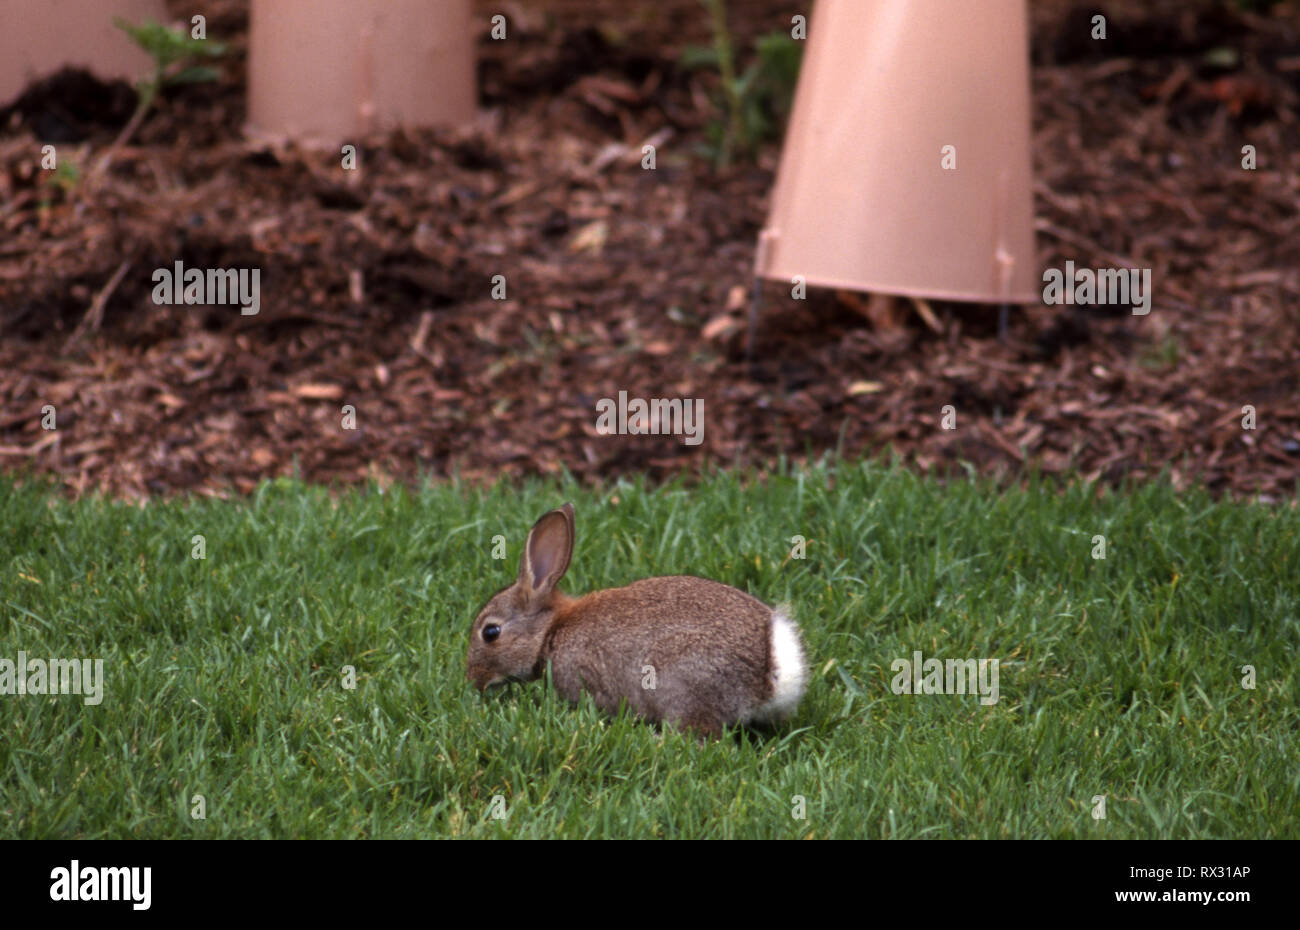 SMALL WILD RABBIT EATING NEAR PLANTS THAT ARE PROTECTED BY A PLASTIC PLANT PROTECTORS TO PREVENT DAMAGE BY FORAGING ANIMALS. Stock Photo